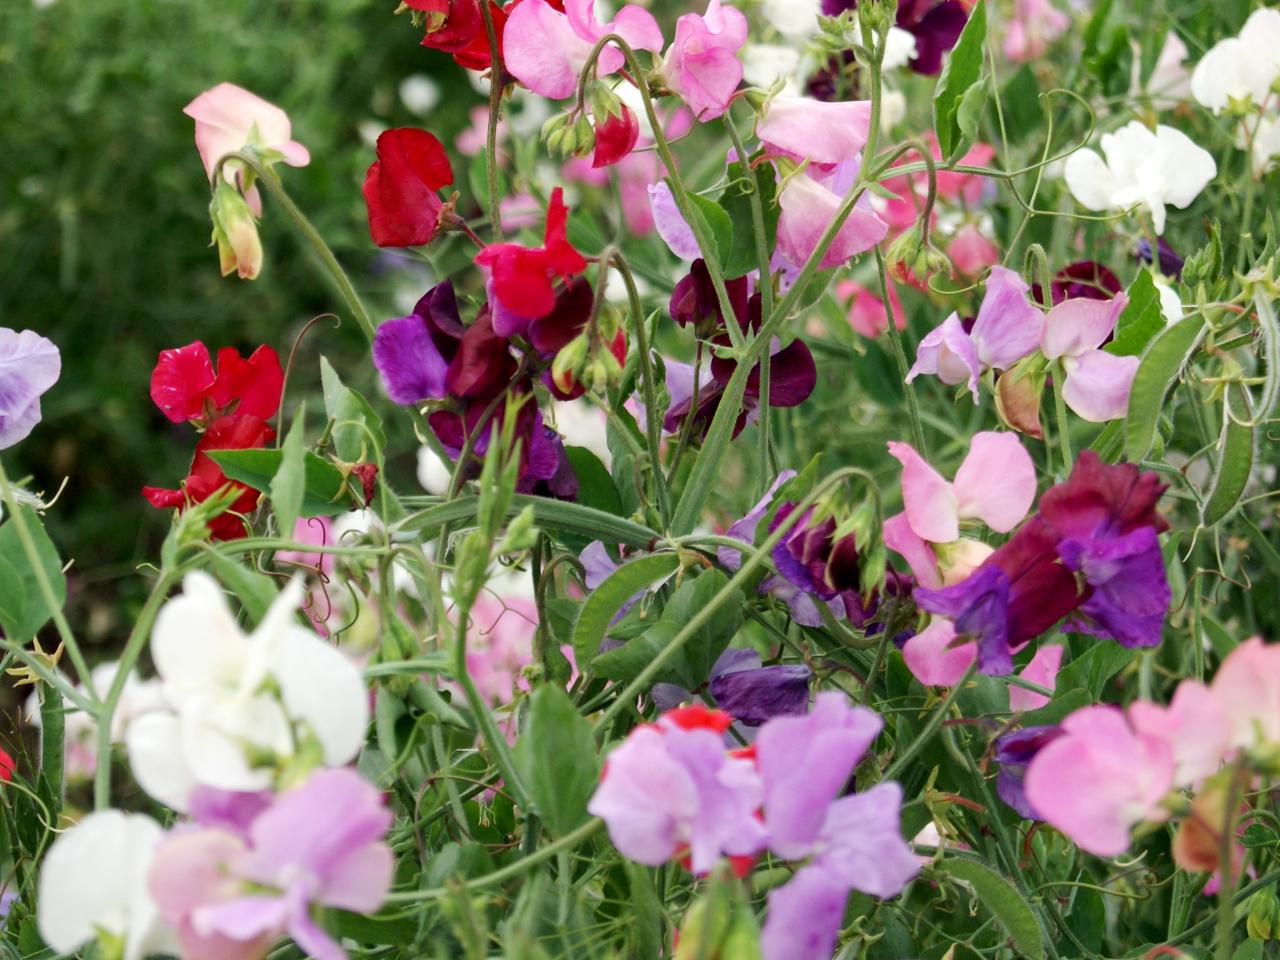 Planting Annuals: When and How To Plant Annual Flowers | HGTV